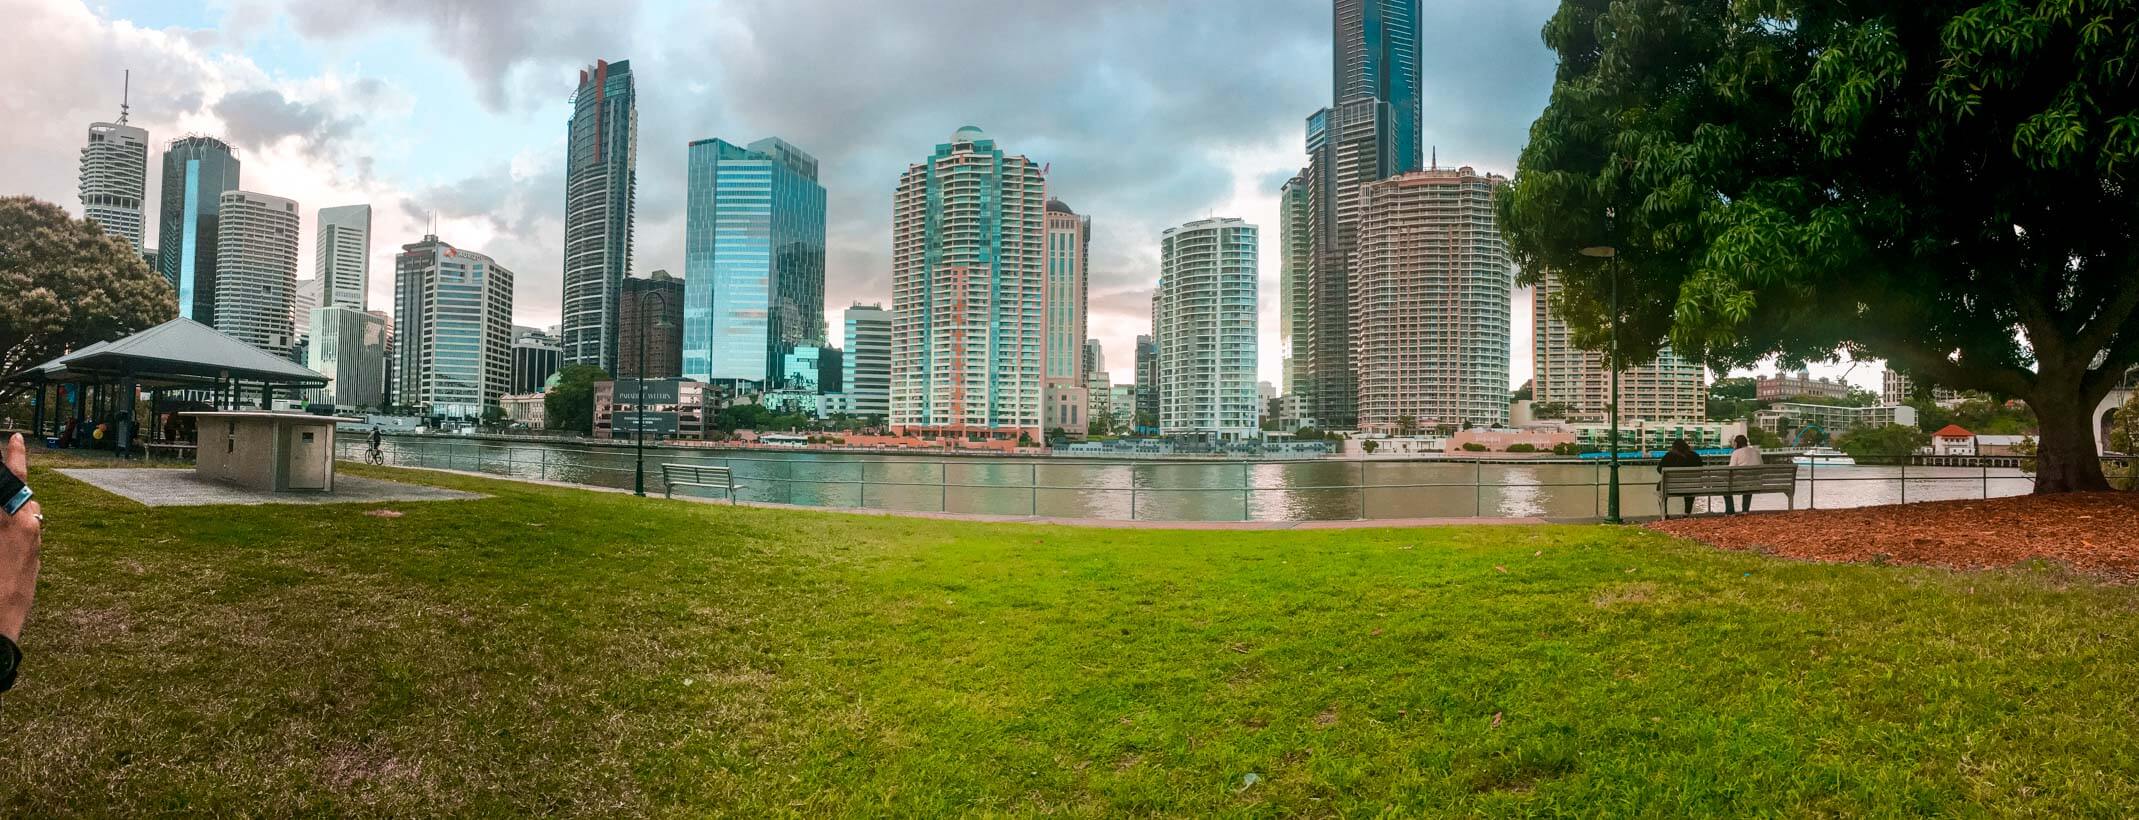 A Brisbane travel guide: The best things to do and see